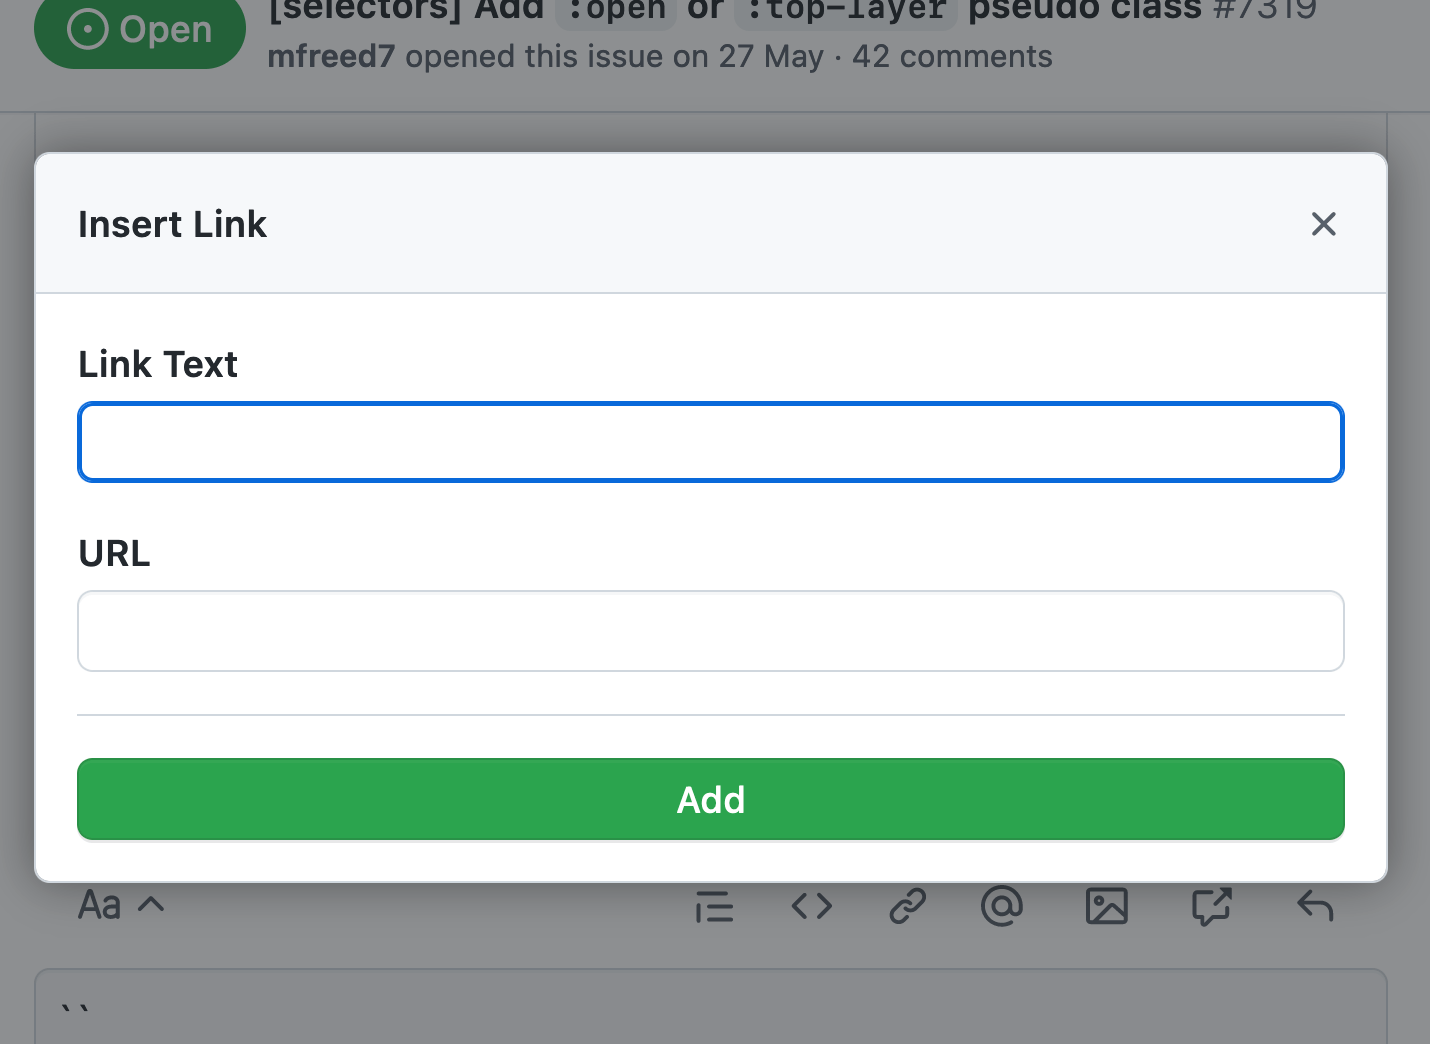 Insert link dialog with behind it a dimmed background. It has fields for Link Text and URL, buttons to close the dialog or add the link